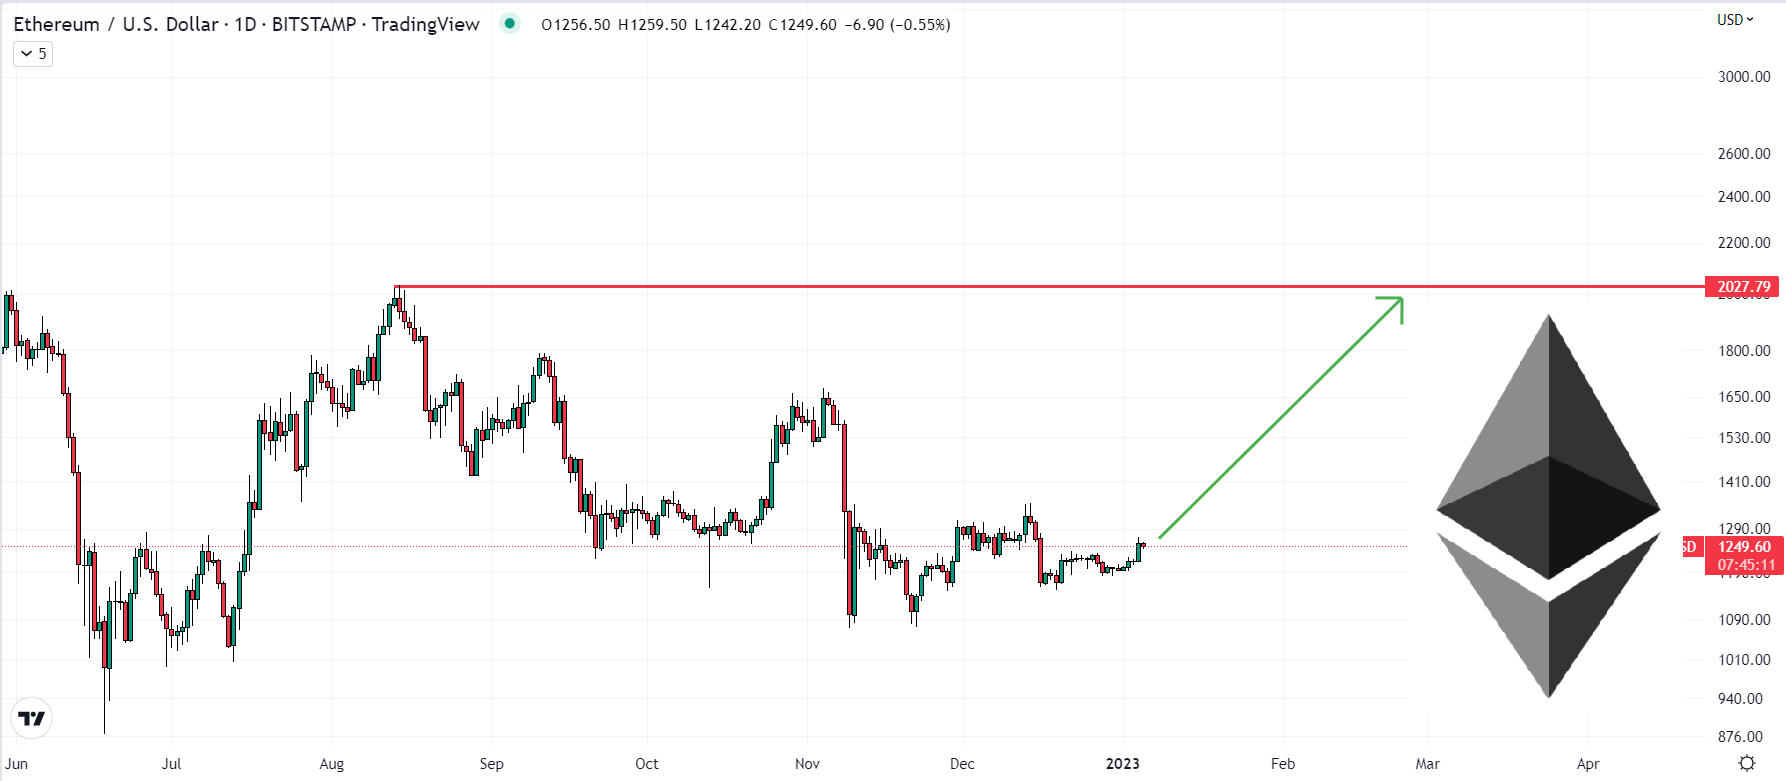 Ethereum Price Prediction up to $27, by - ETH Forecast - 